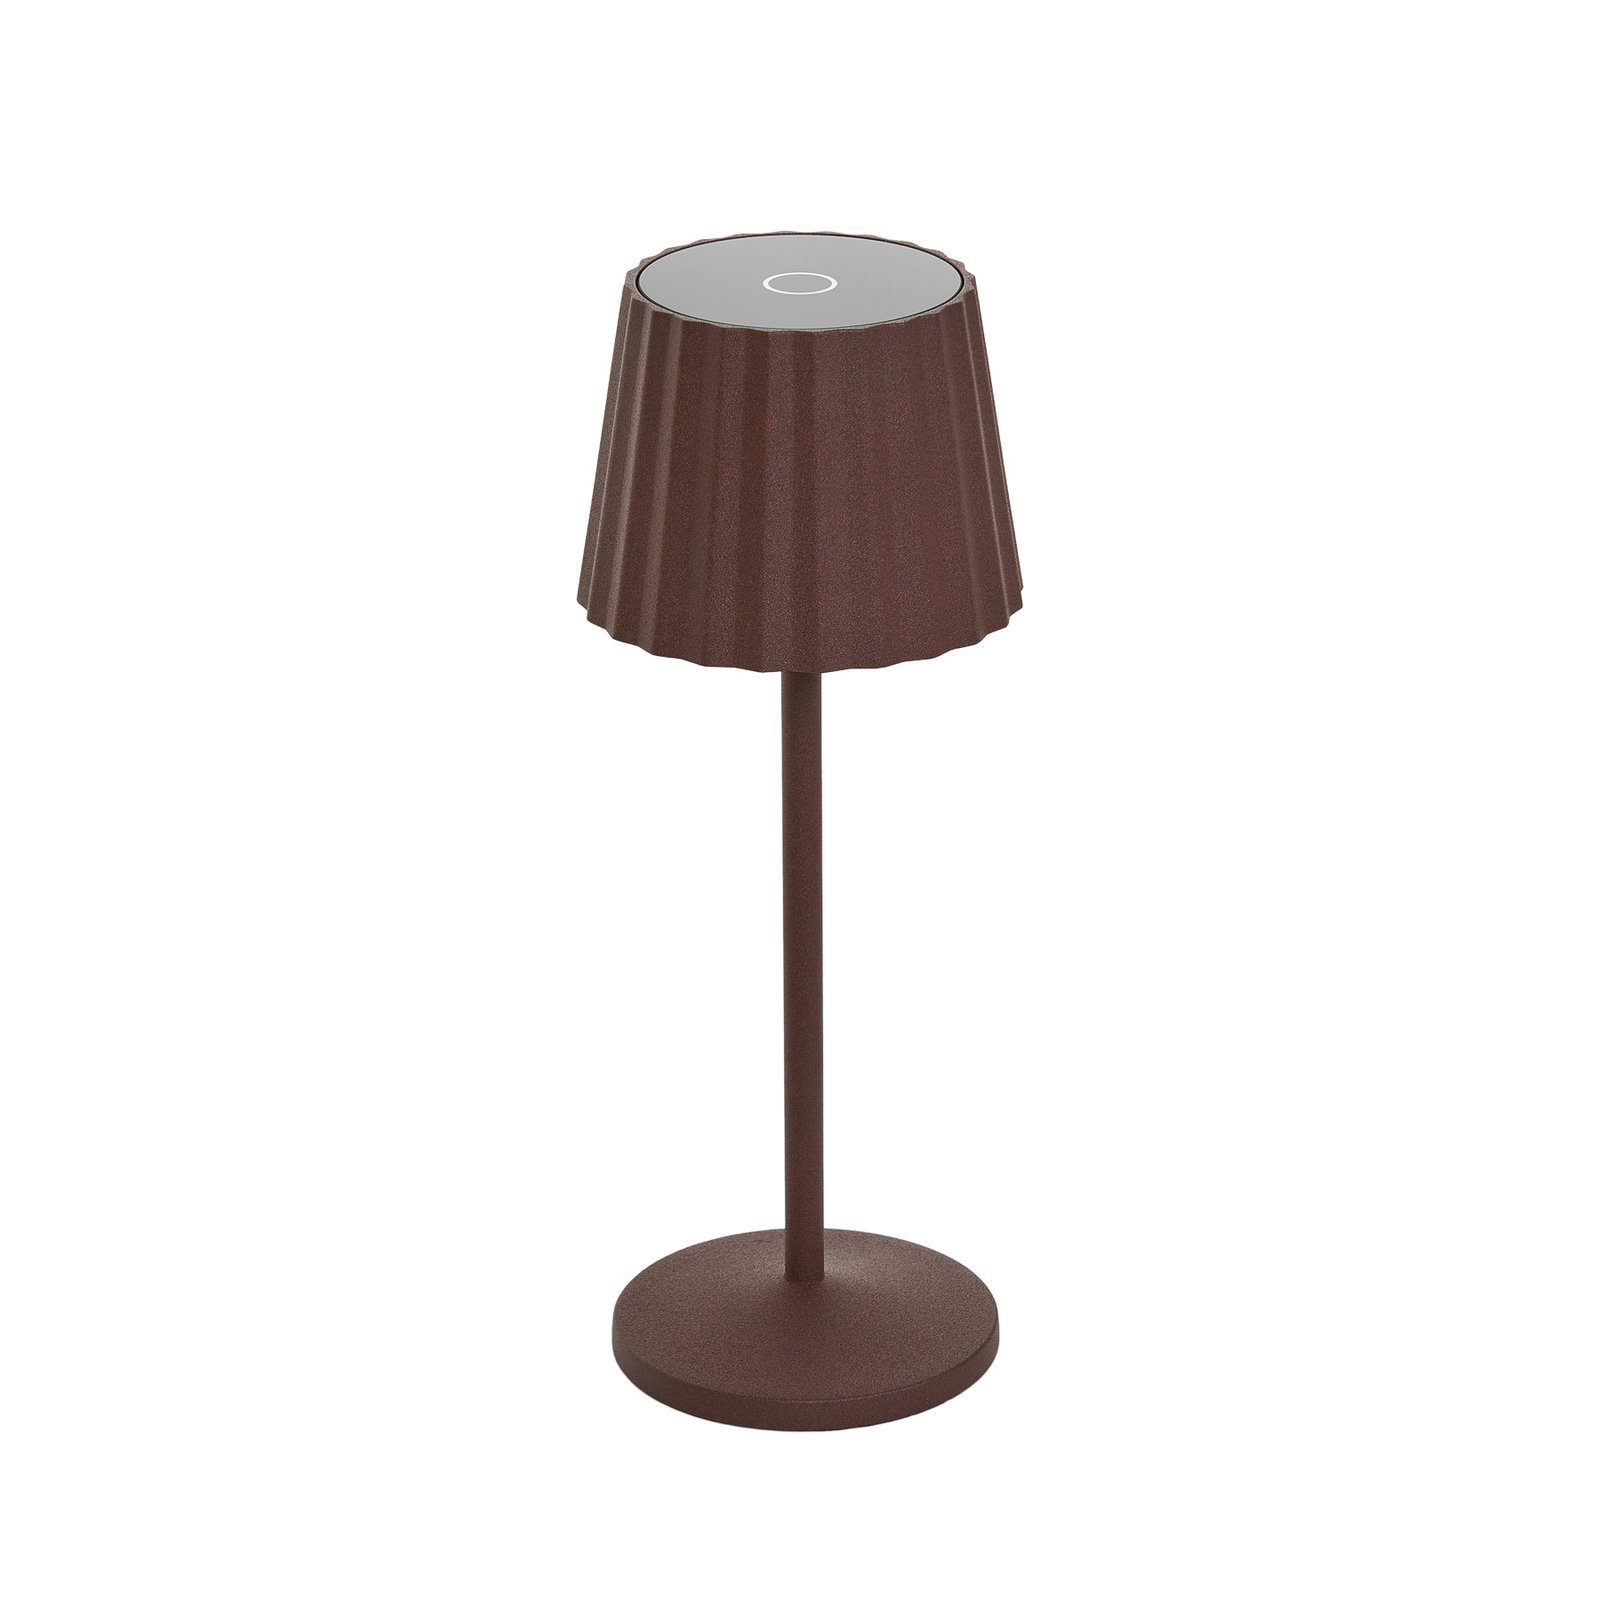 Lindby LED table lamp Esali, rust brown, set of 3